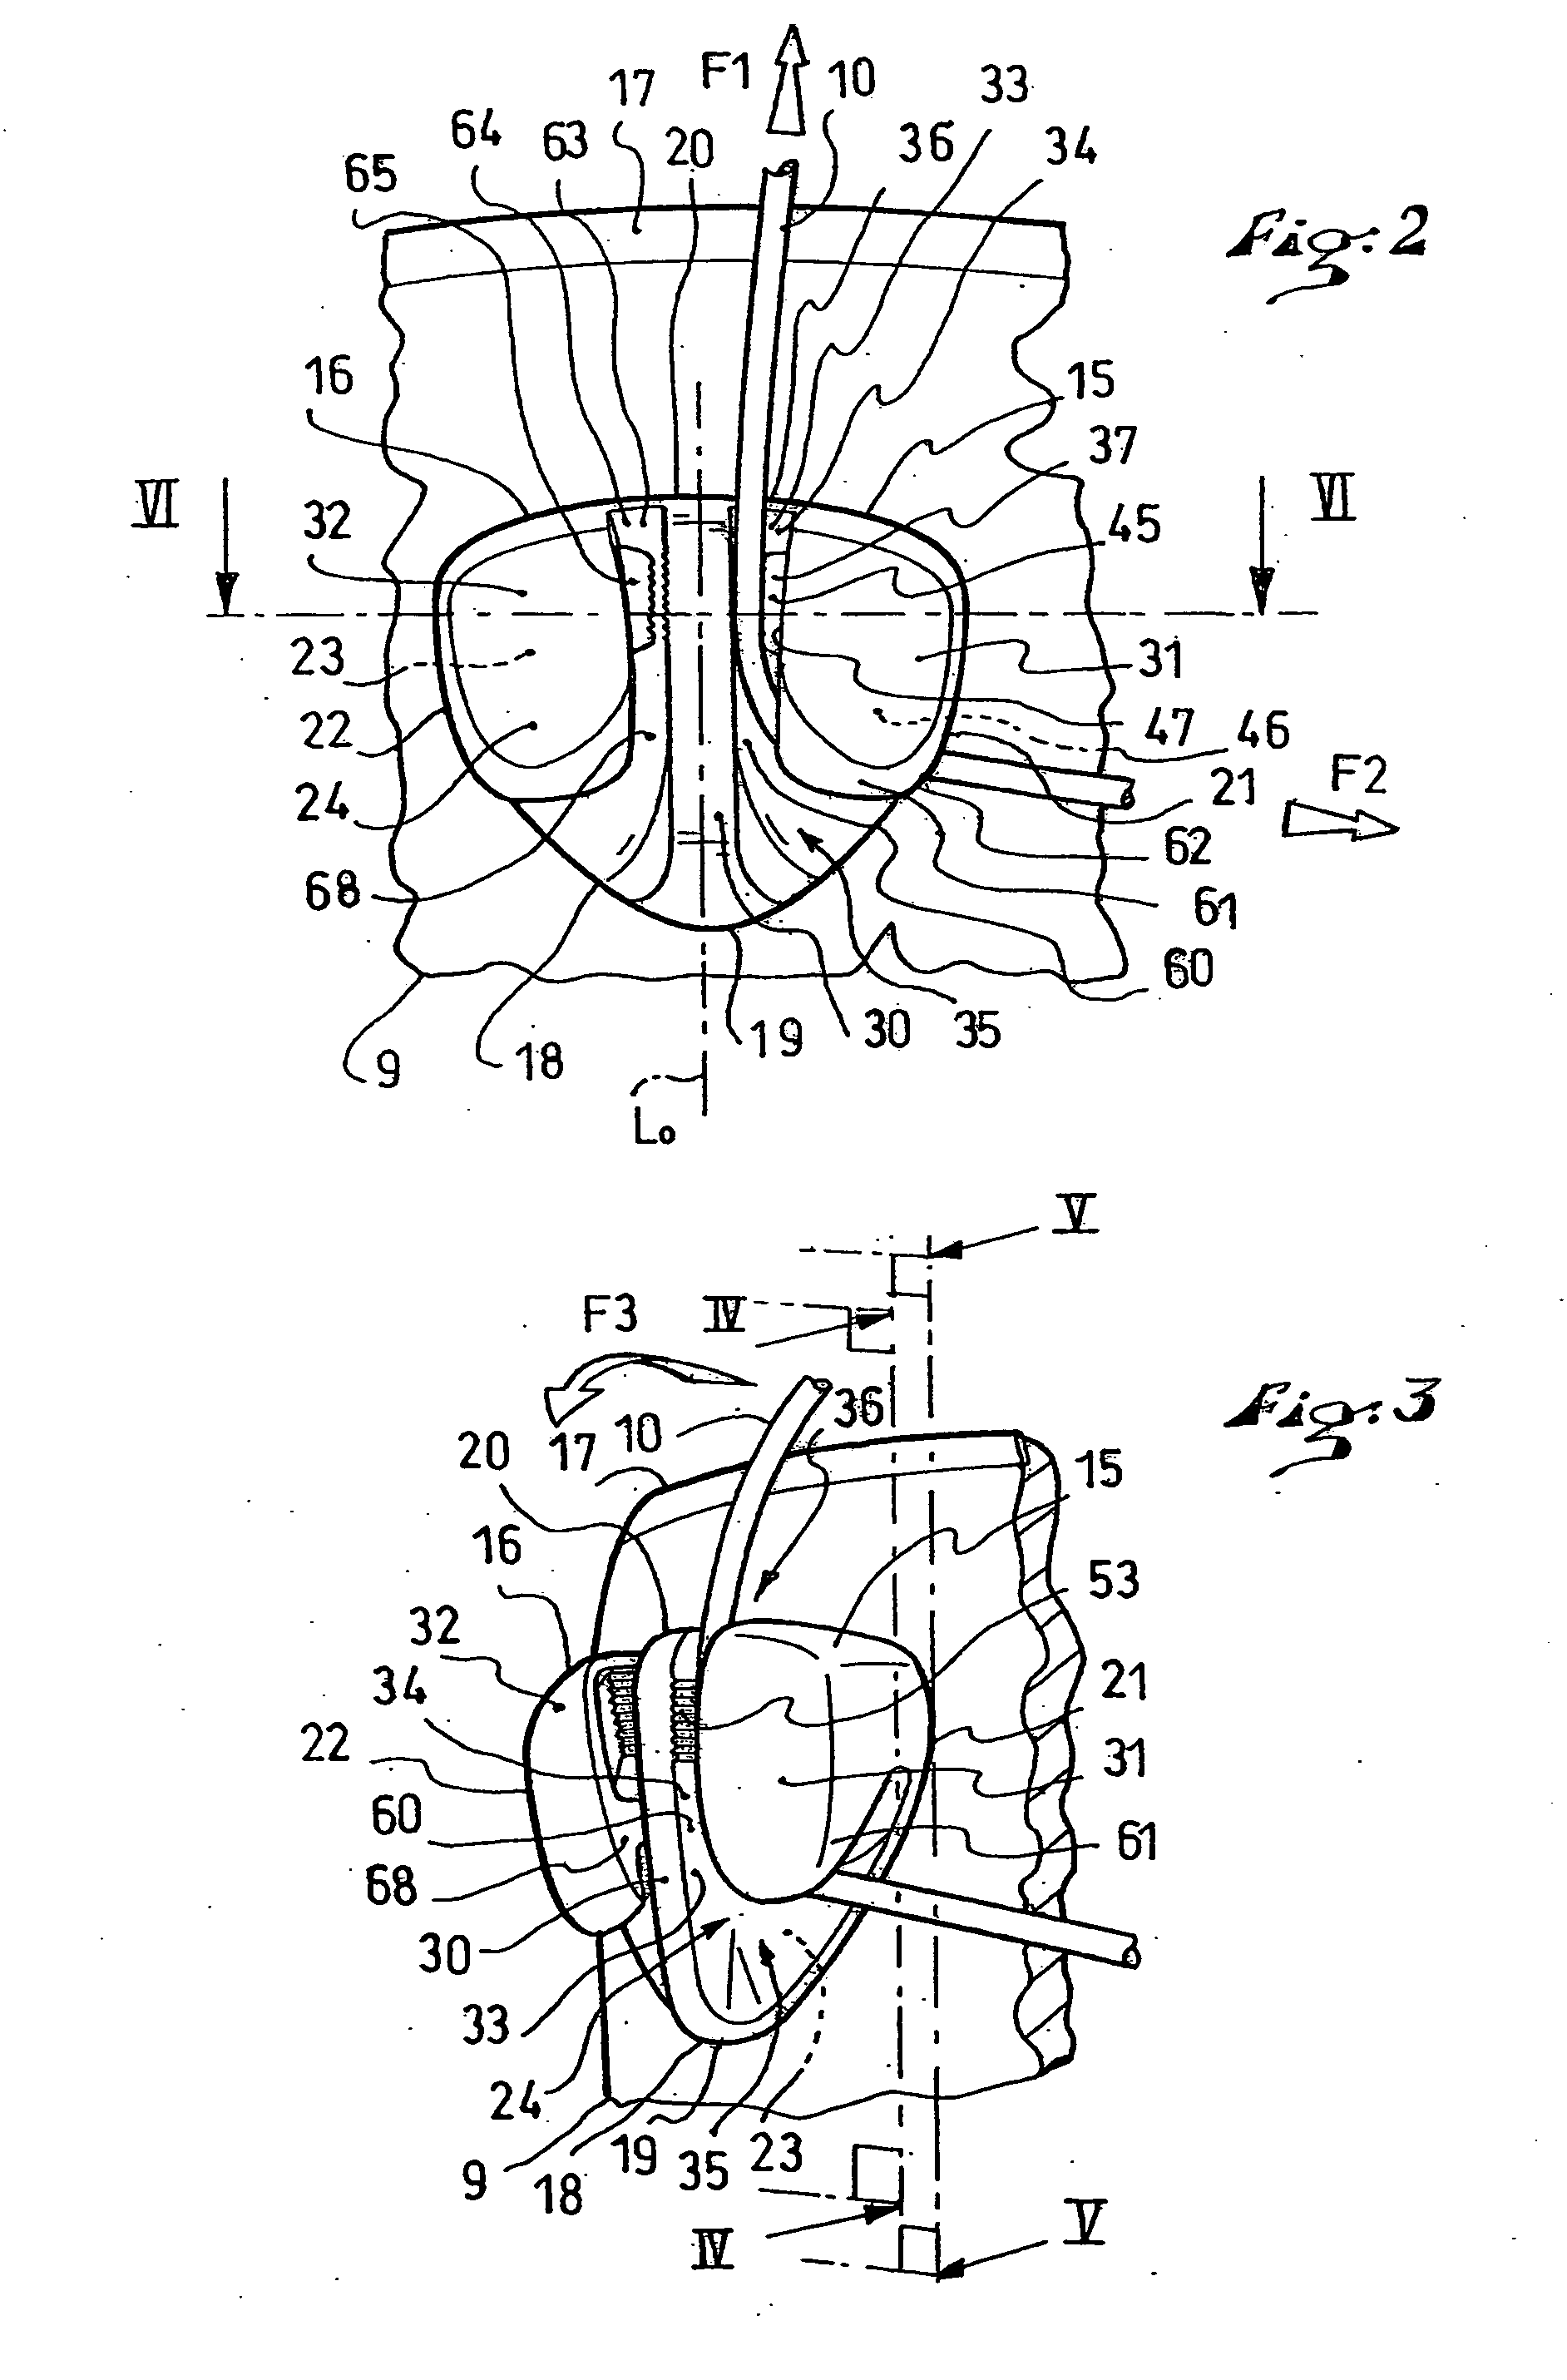 Device for blocking flexible strands